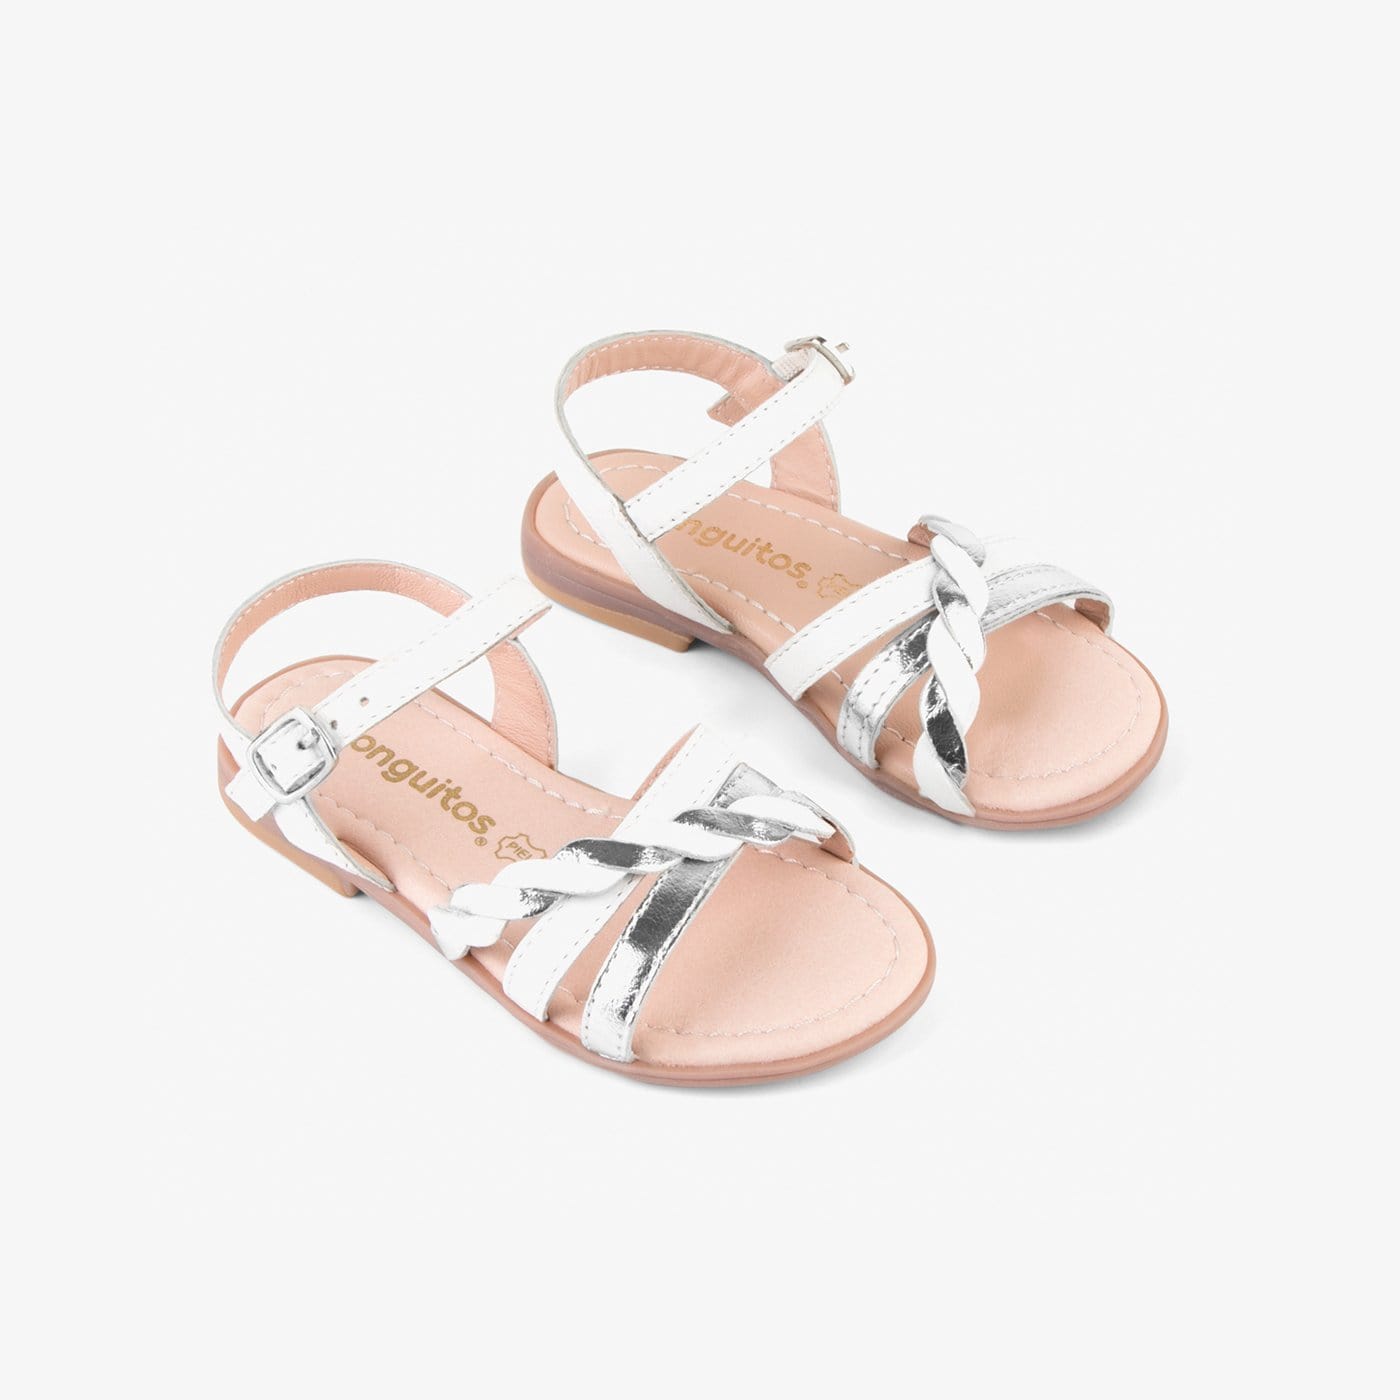 CONGUITOS Shoes Girl's White And Silver Leather Sandals